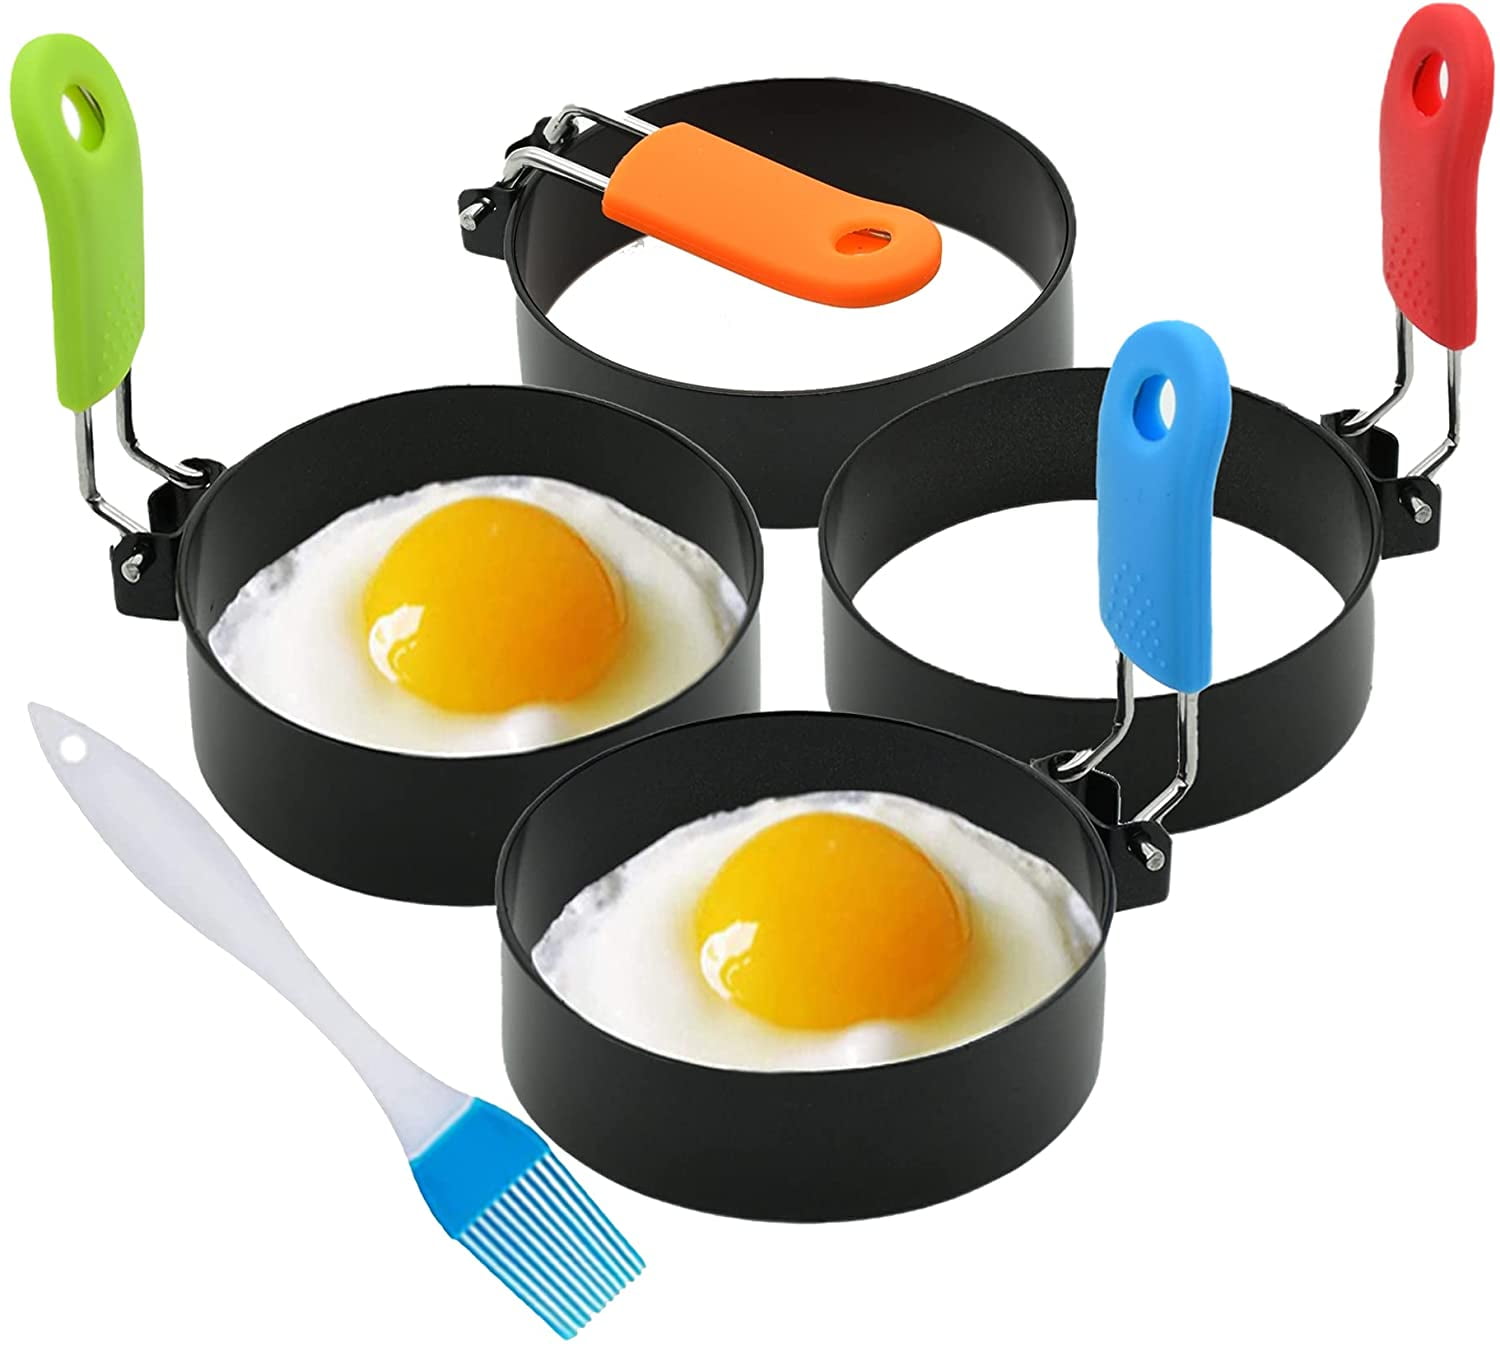 Egg Shaper Pancake Maker with Handle Stainless Steel Egg Form for Frying Cooking Stainless Steel Omelet Mold Fried Egg Mold Ring Set of 5 